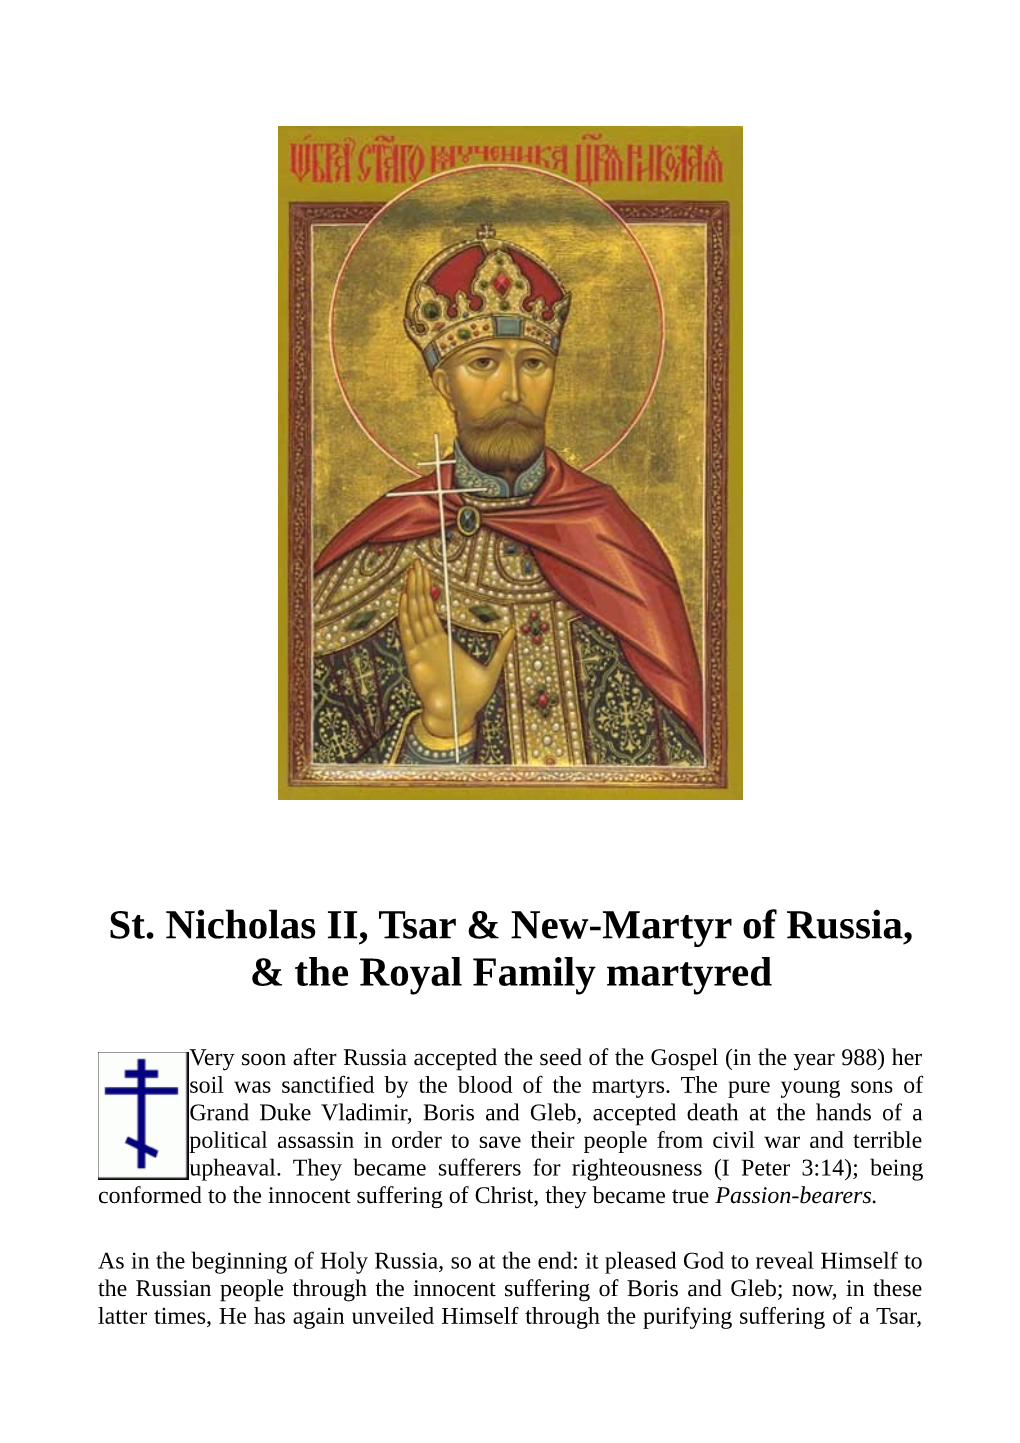 St. Nicholas II, Tsar & New-Martyr of Russia, & the Royal Family Martyred